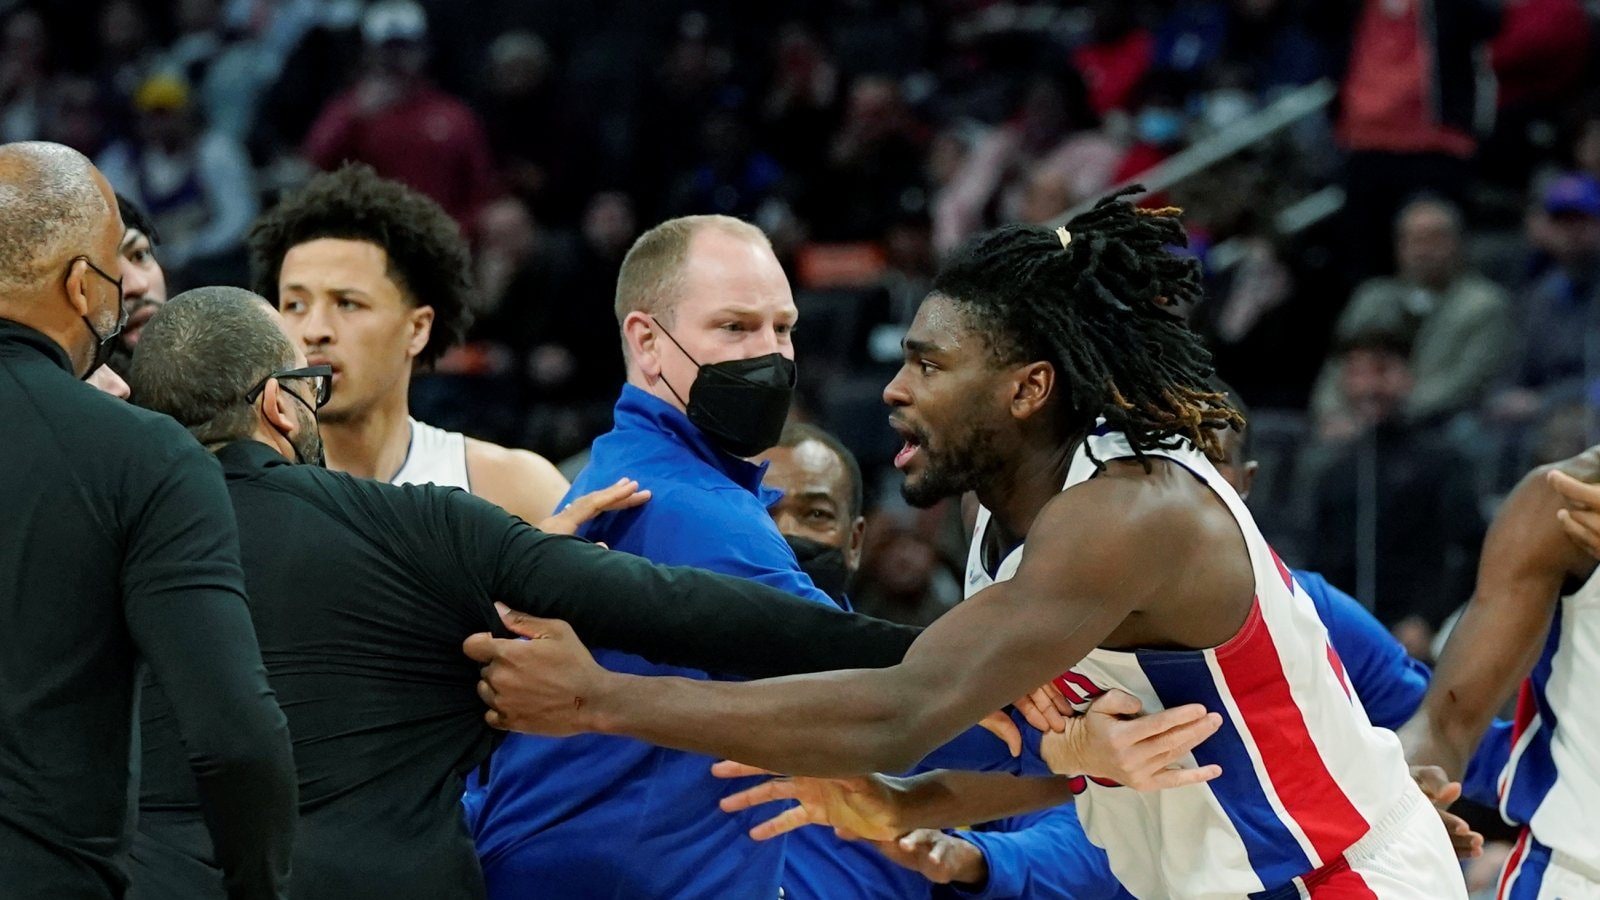 Detroit Pistons' Isaiah Stewart suspended 2 games after altercation